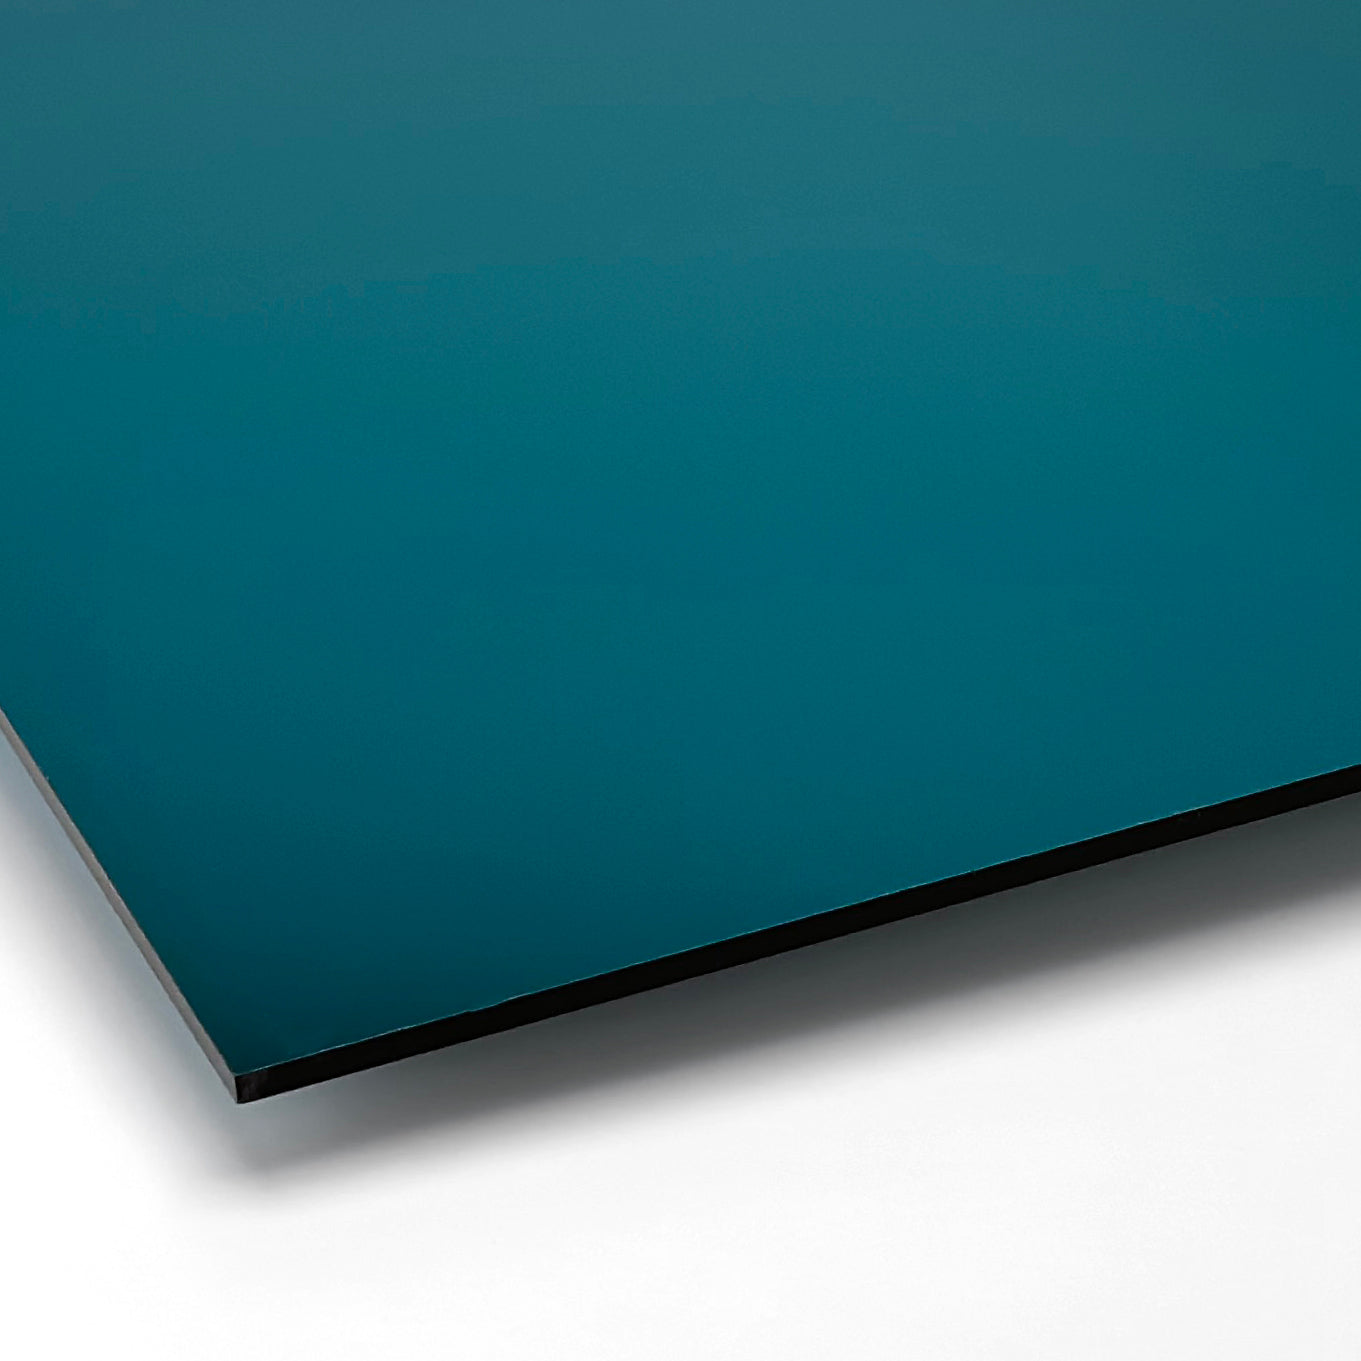 Mirror Jade Acrylic with laser cutting only - 300x200mm